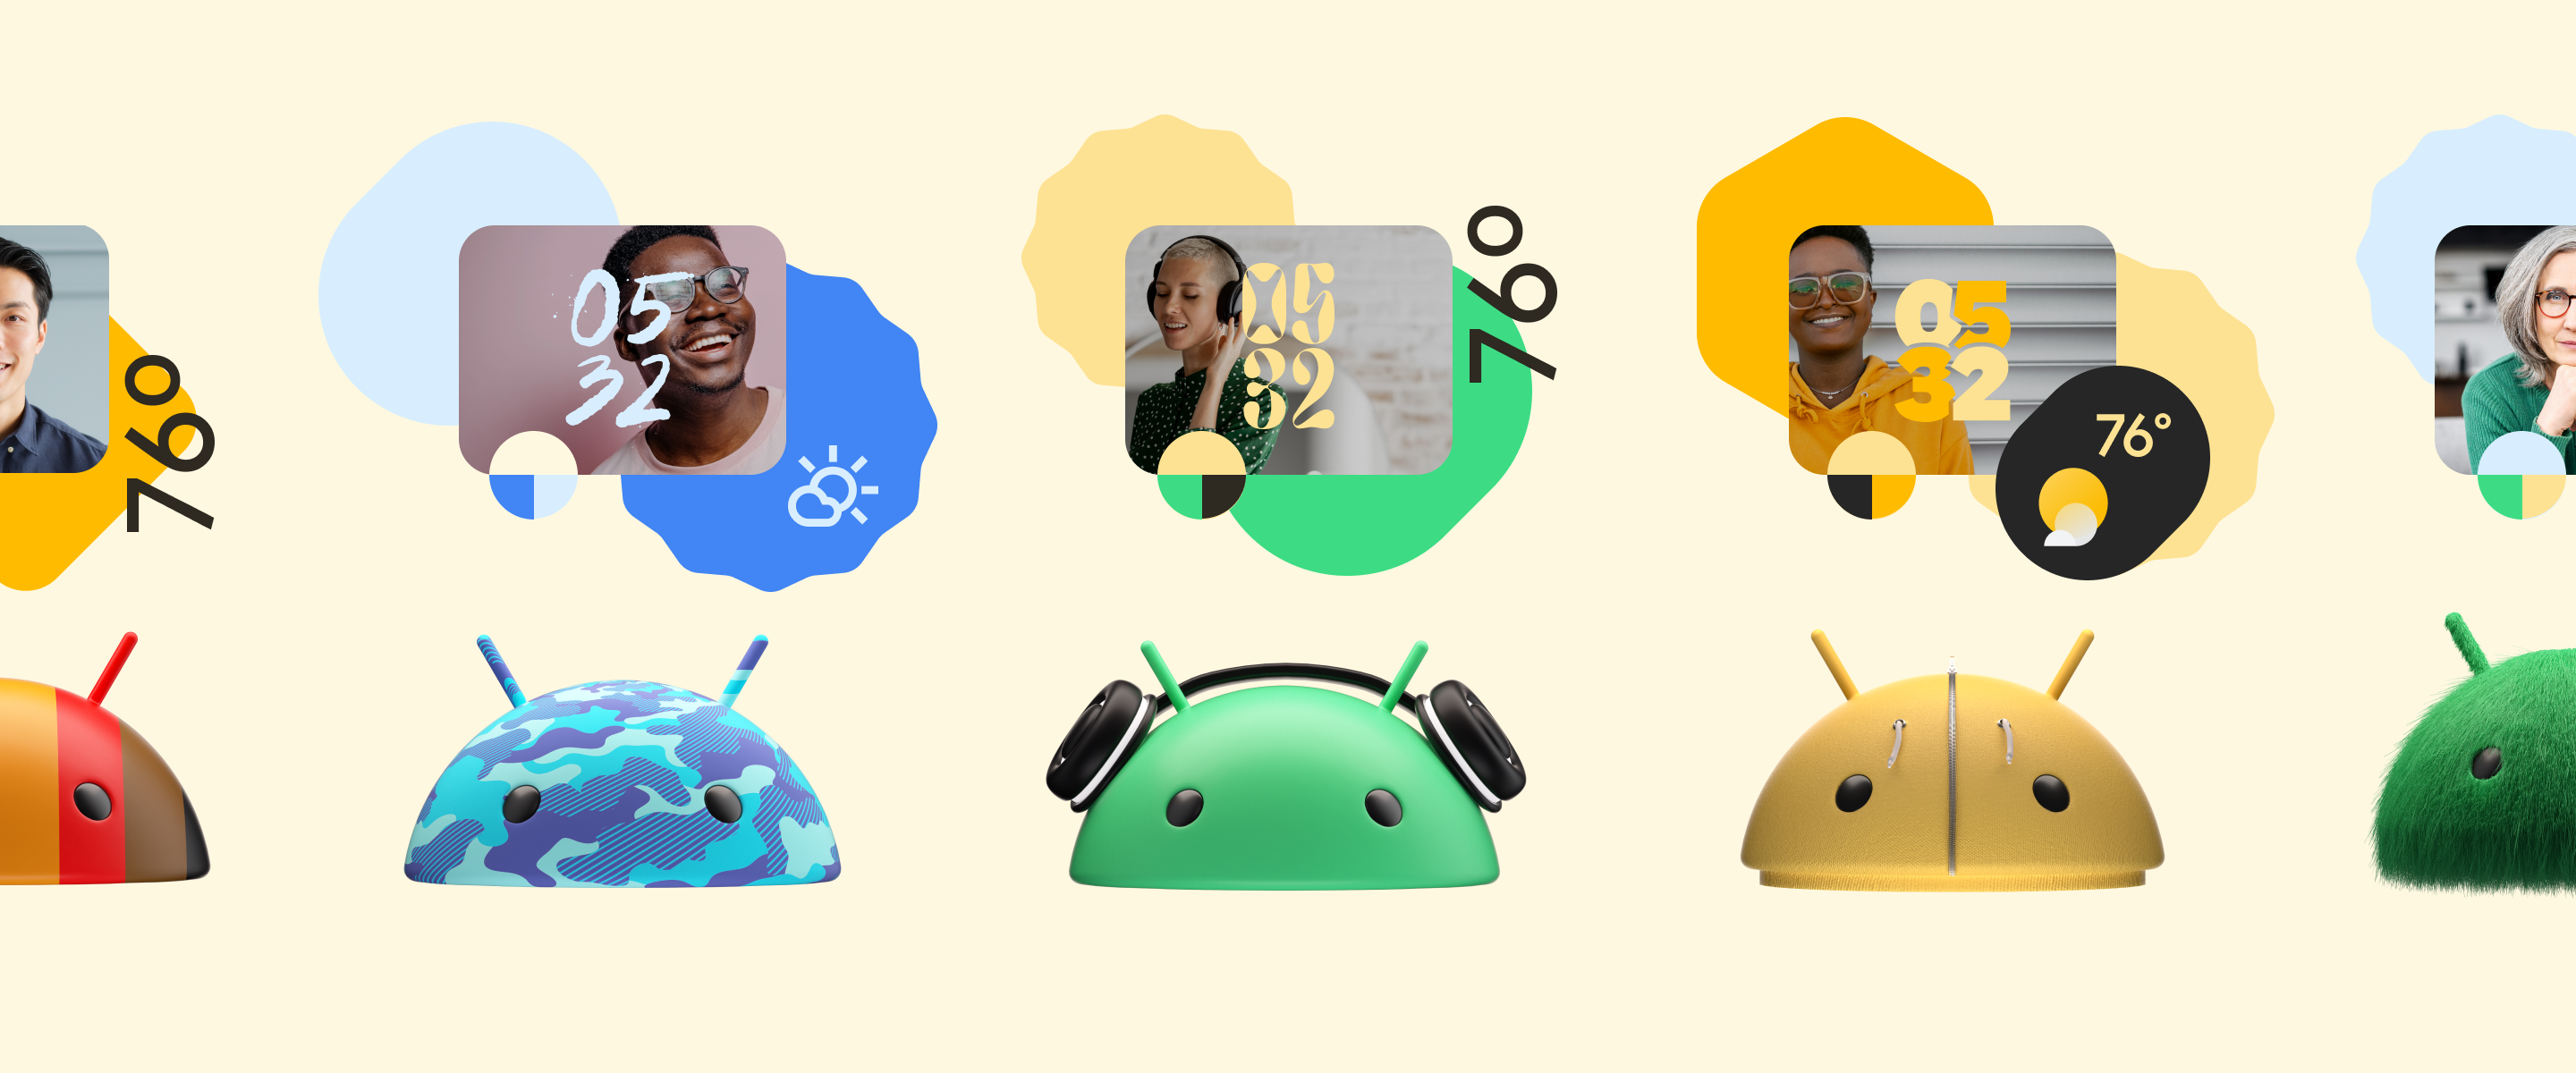 A series of decorated Android bot heads with corresponding clocks and widgets in the same colorways as the bots.